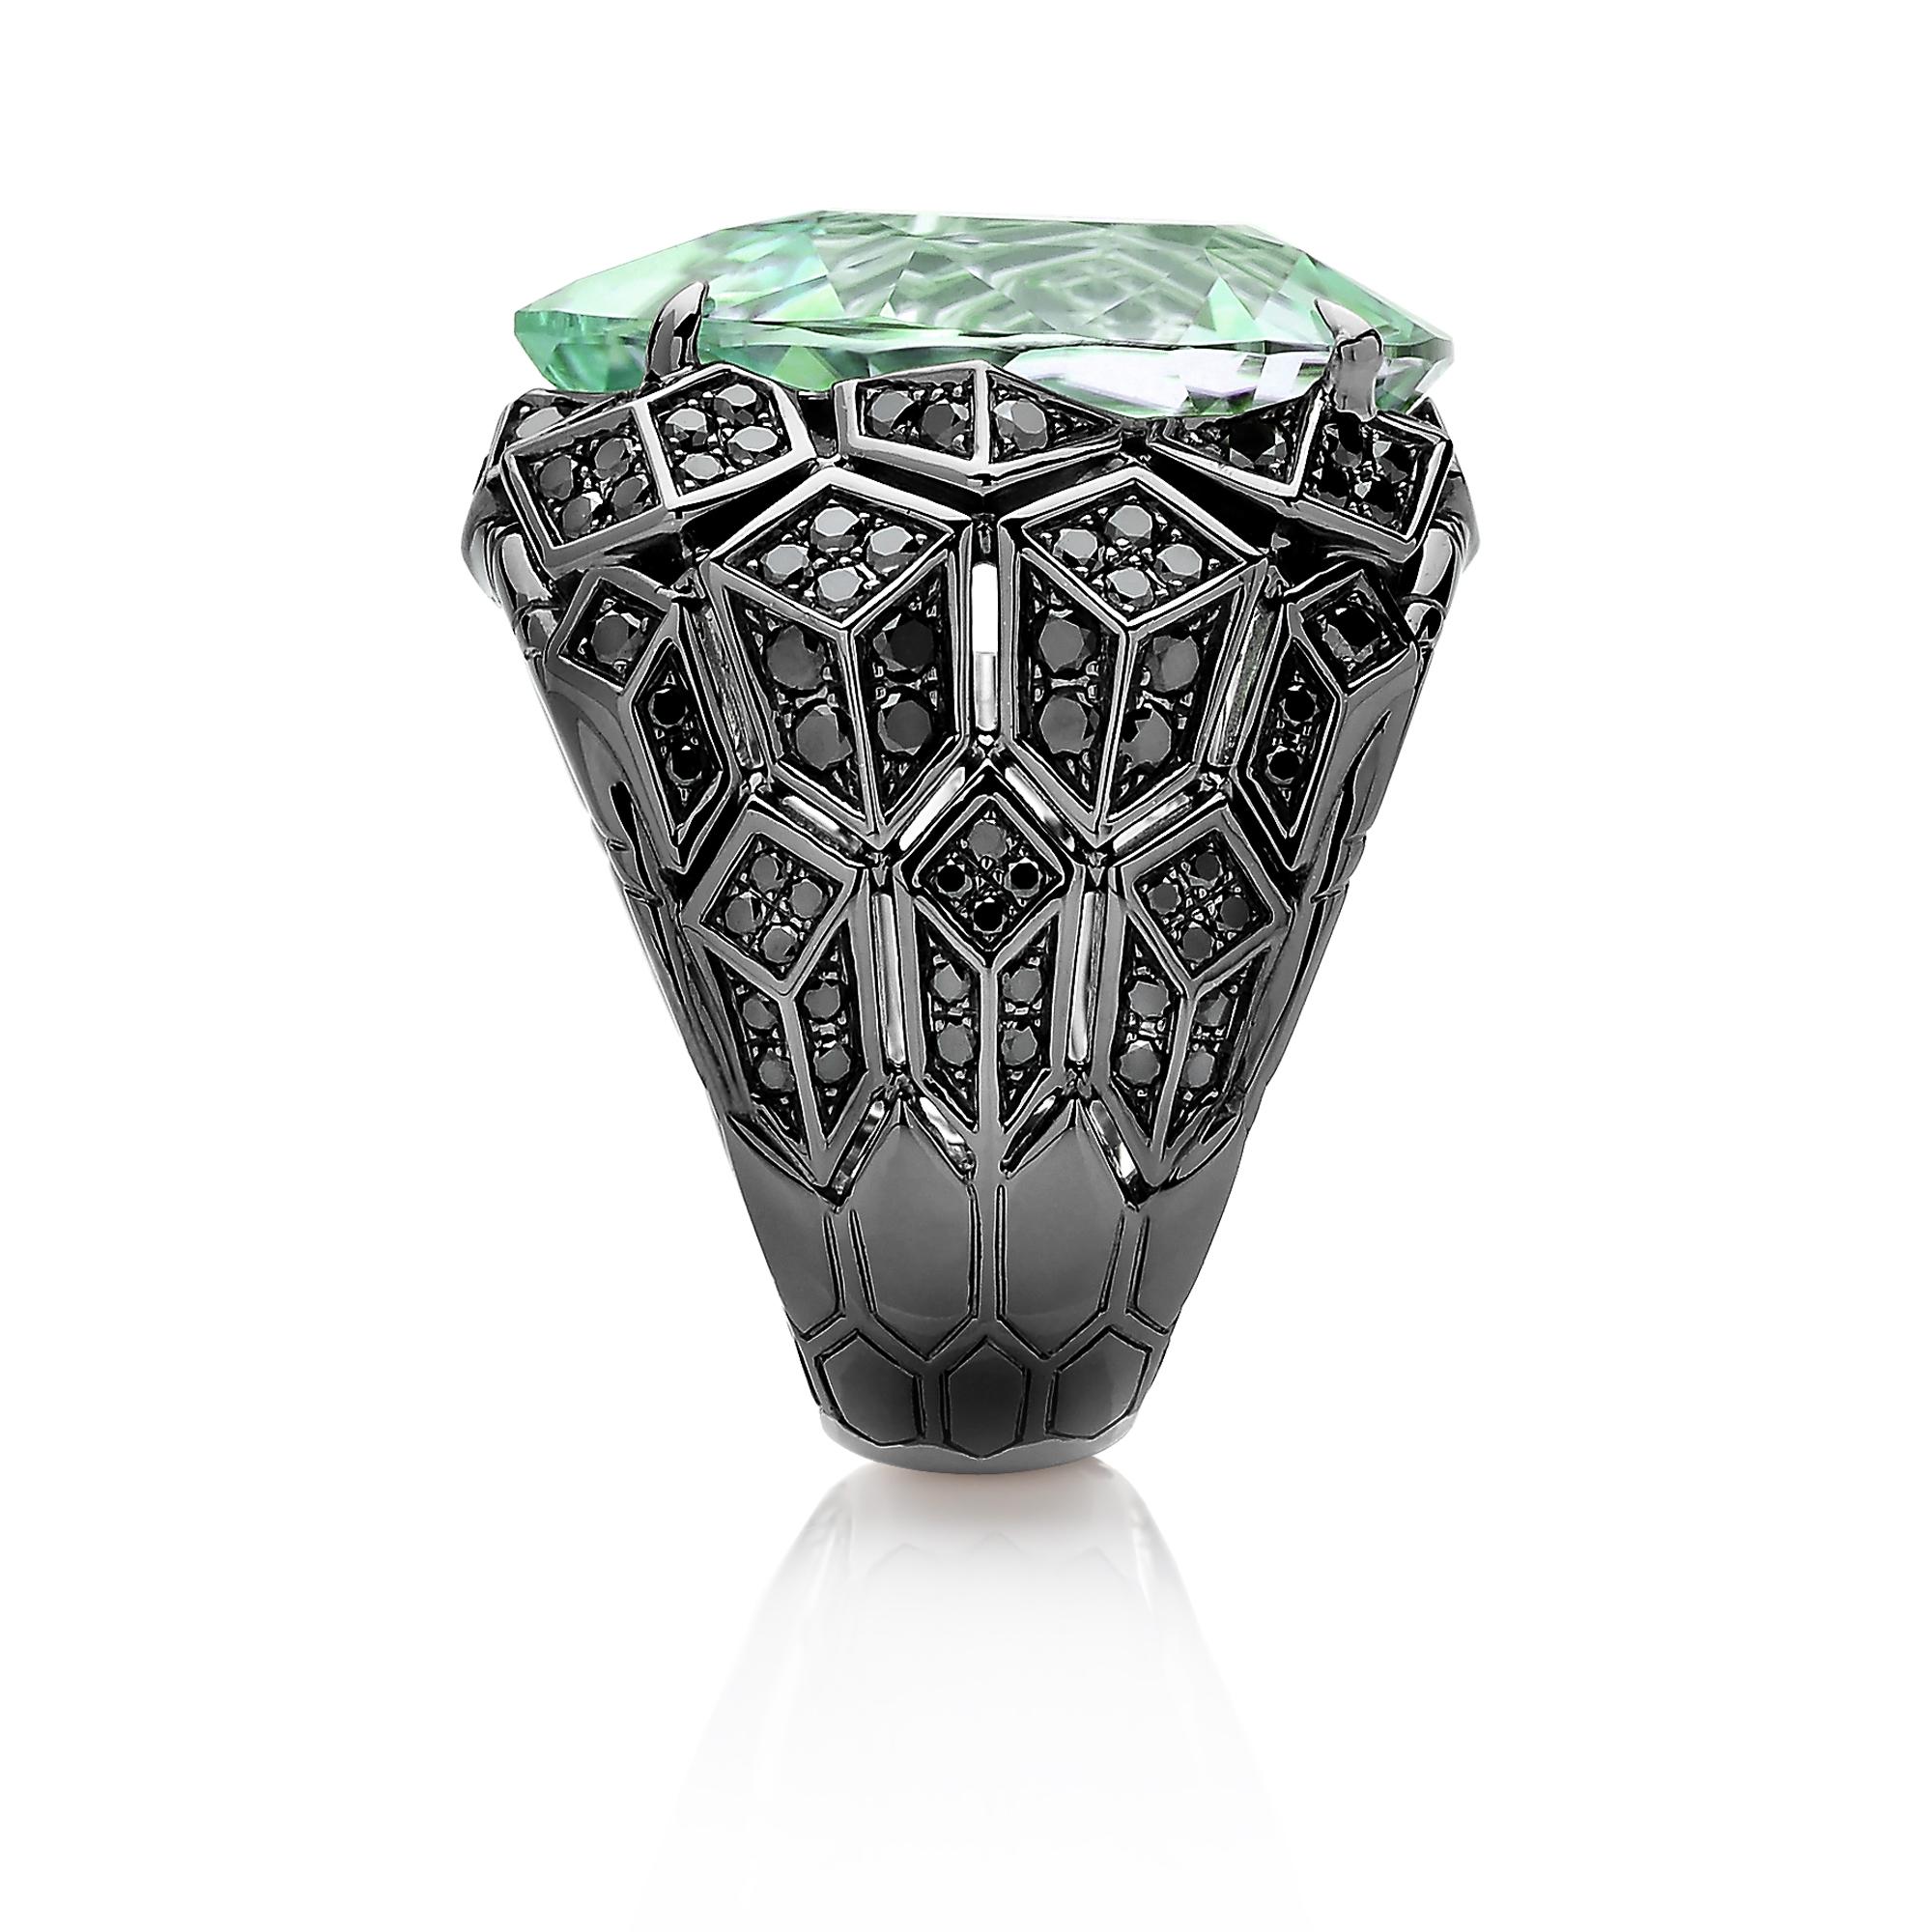 One of a kind 'Cat Woman' ring with an exquisite pear-shape mint tourmaline and black diamonds set in 18 karat black rhodium plated white gold. 

The beauty is in the details - from the combination of hues, the cut of the gemstones, and the color of